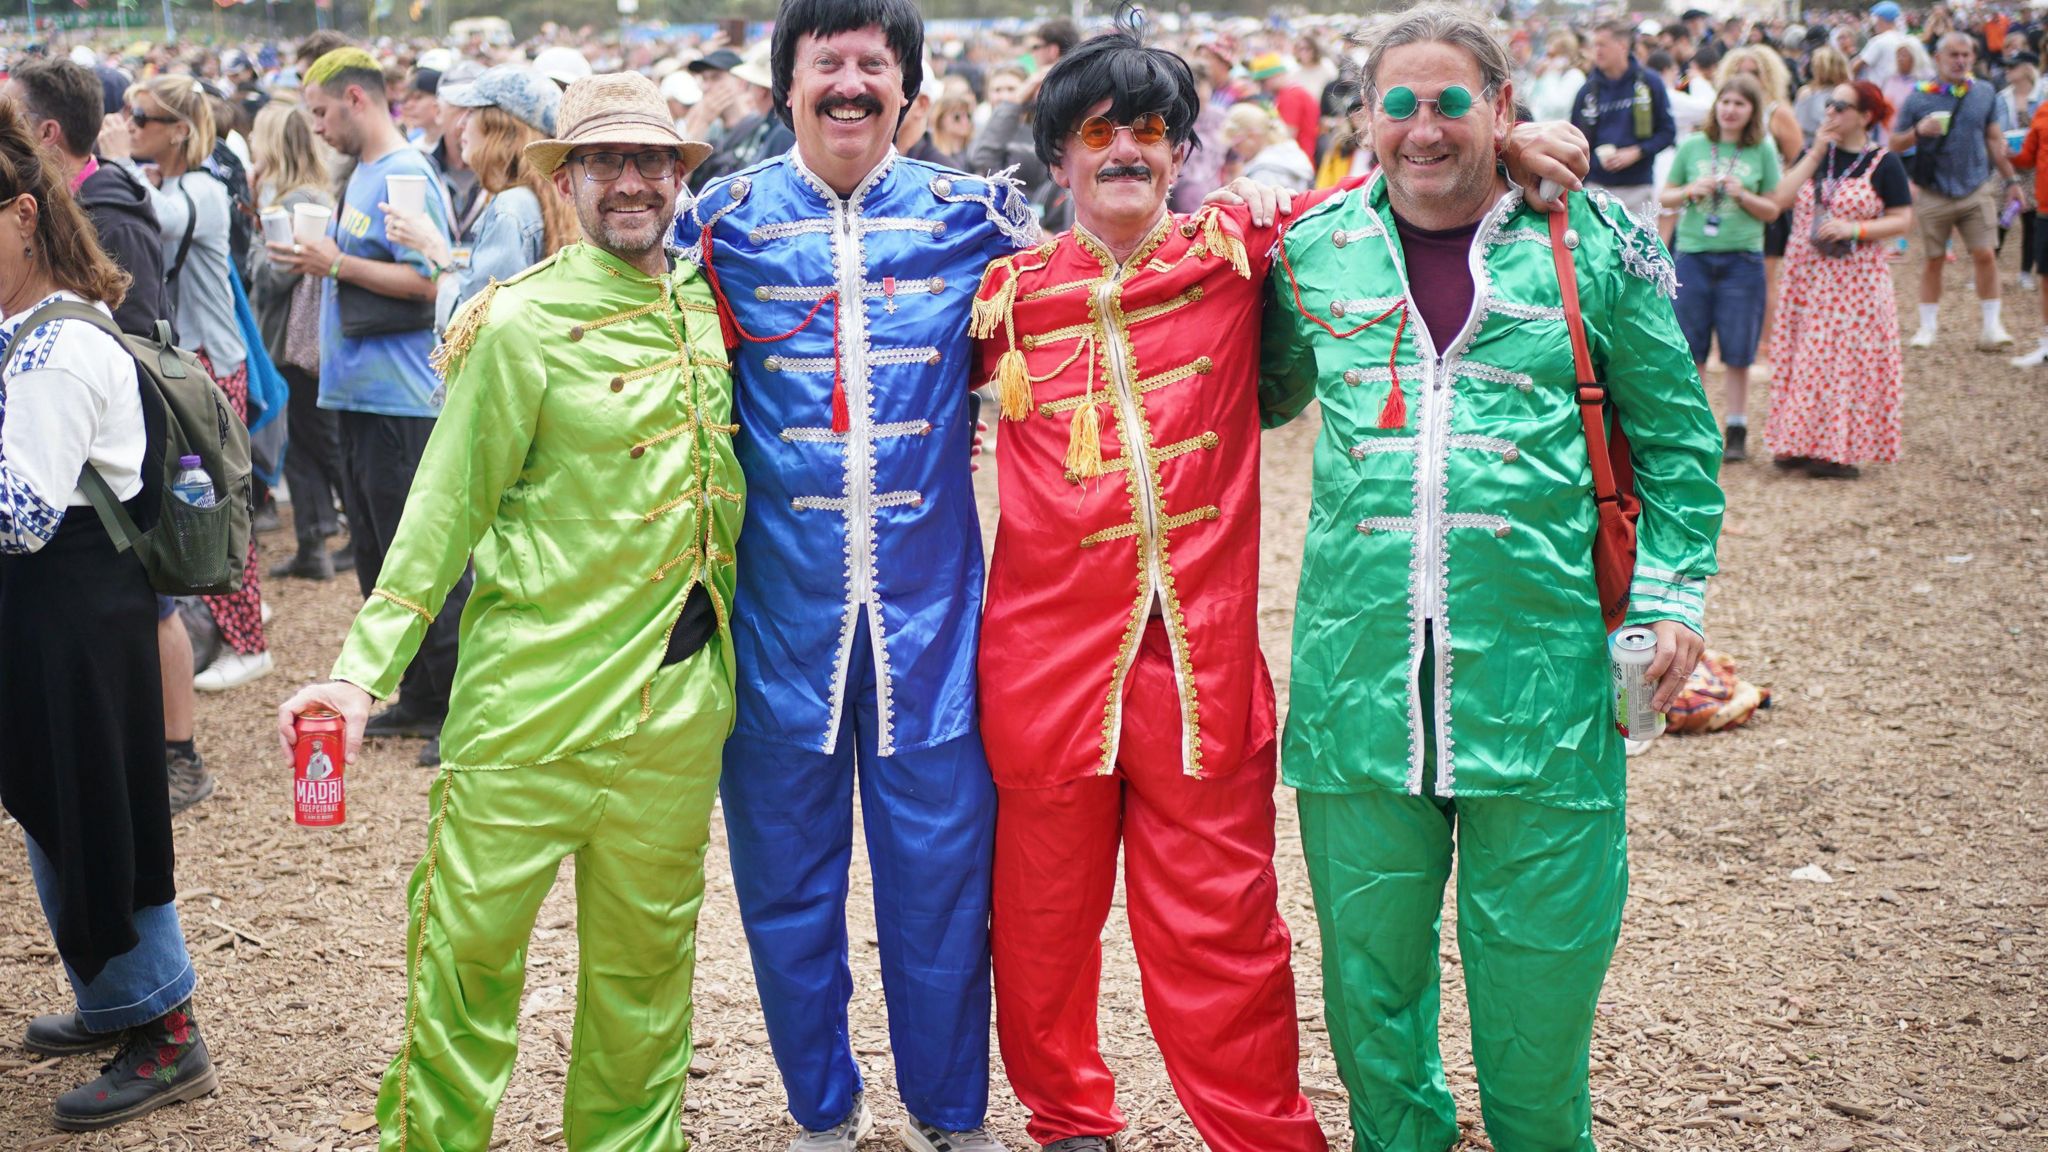 Festival goers dressed as the Beatles